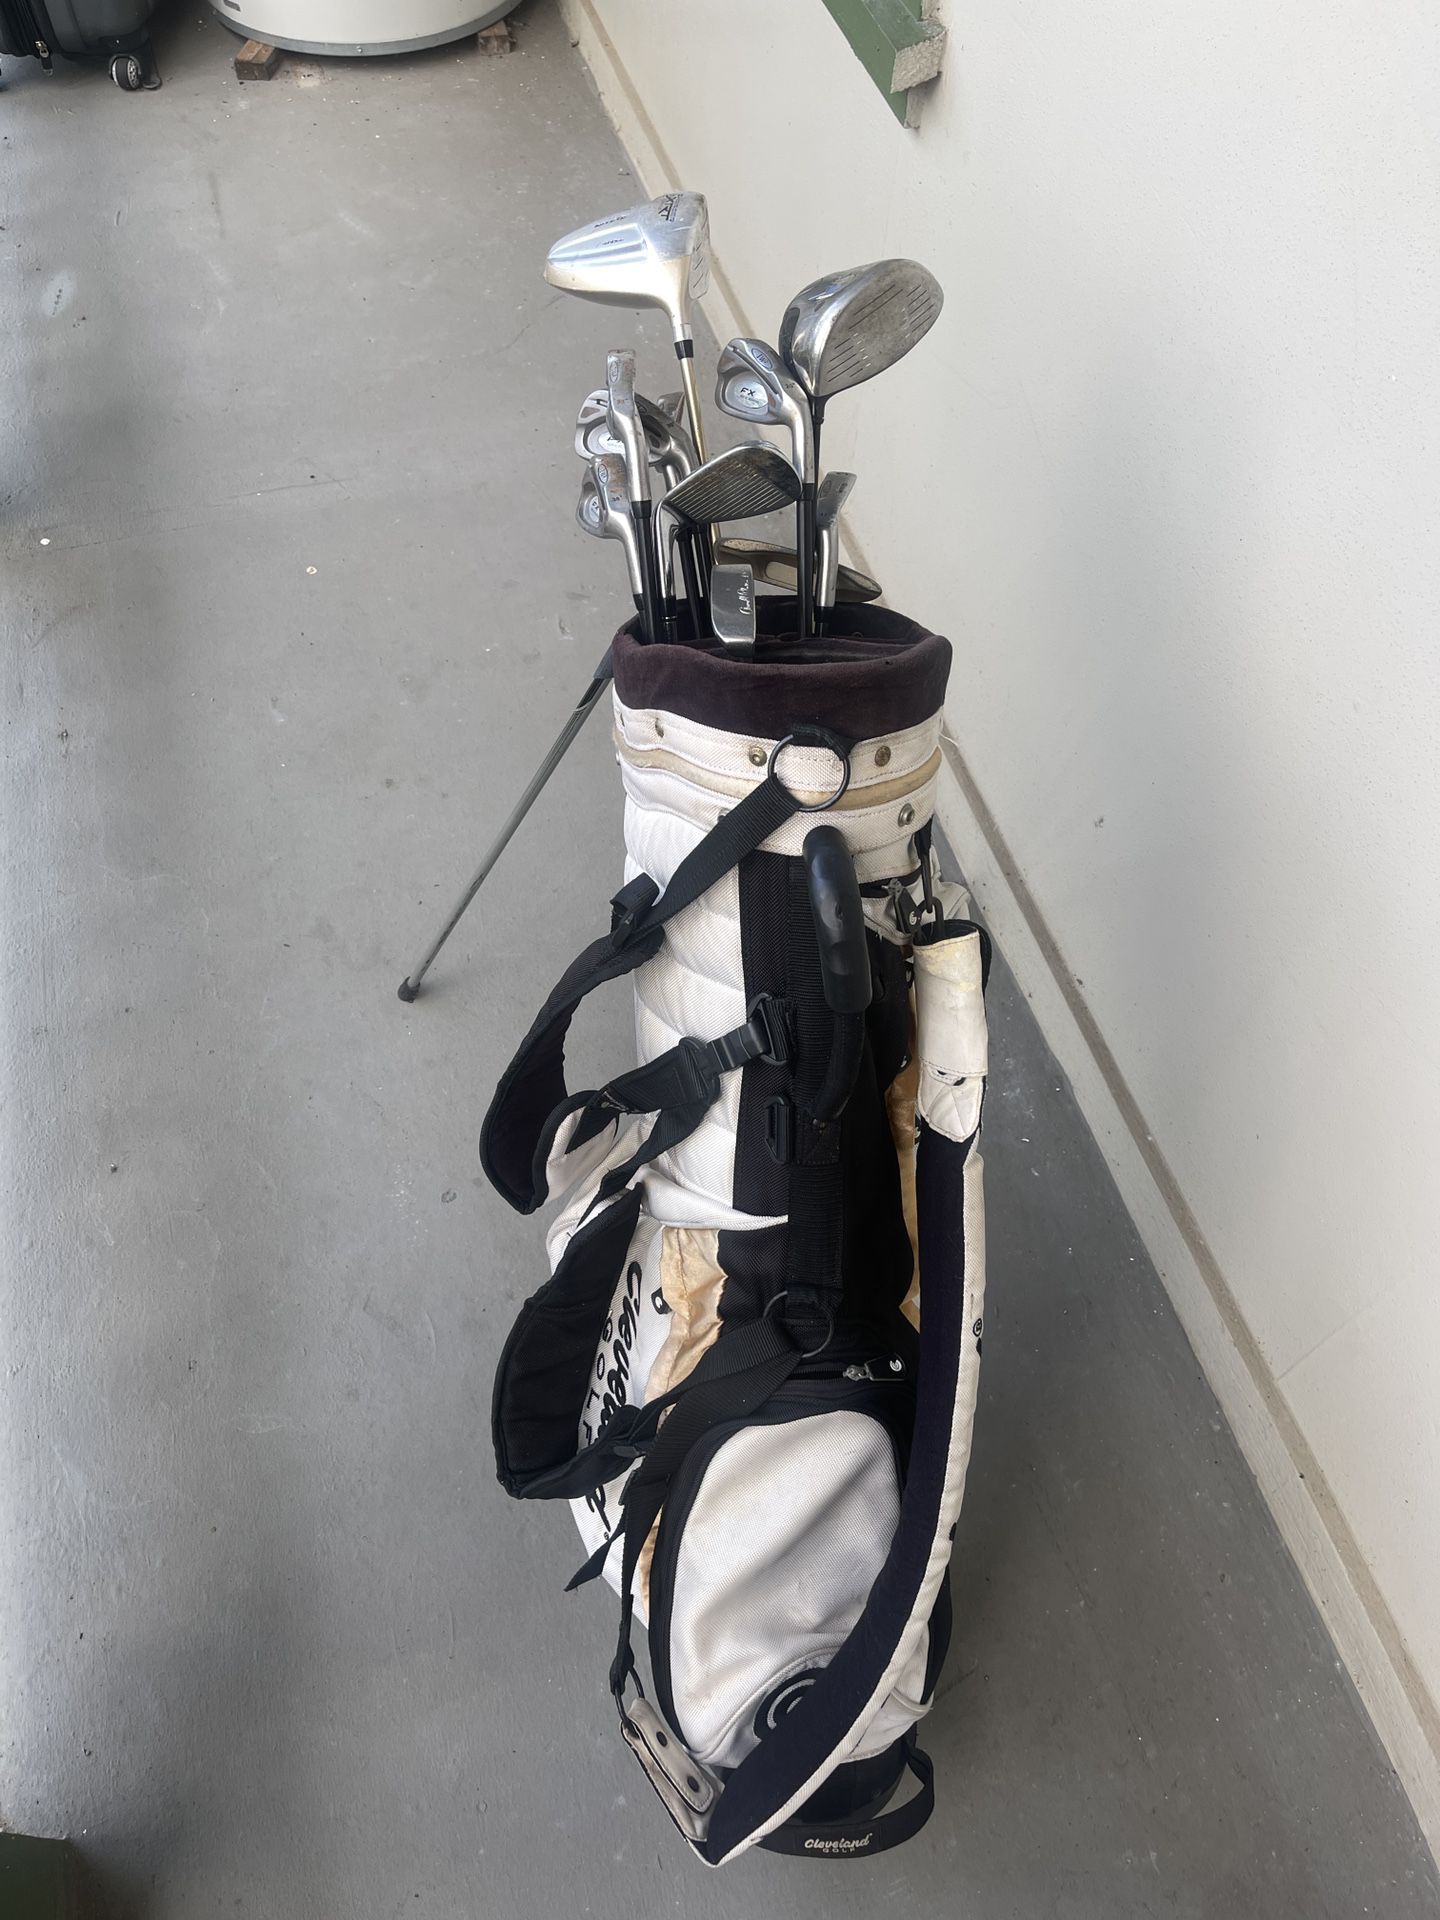 Golf clubs with bag